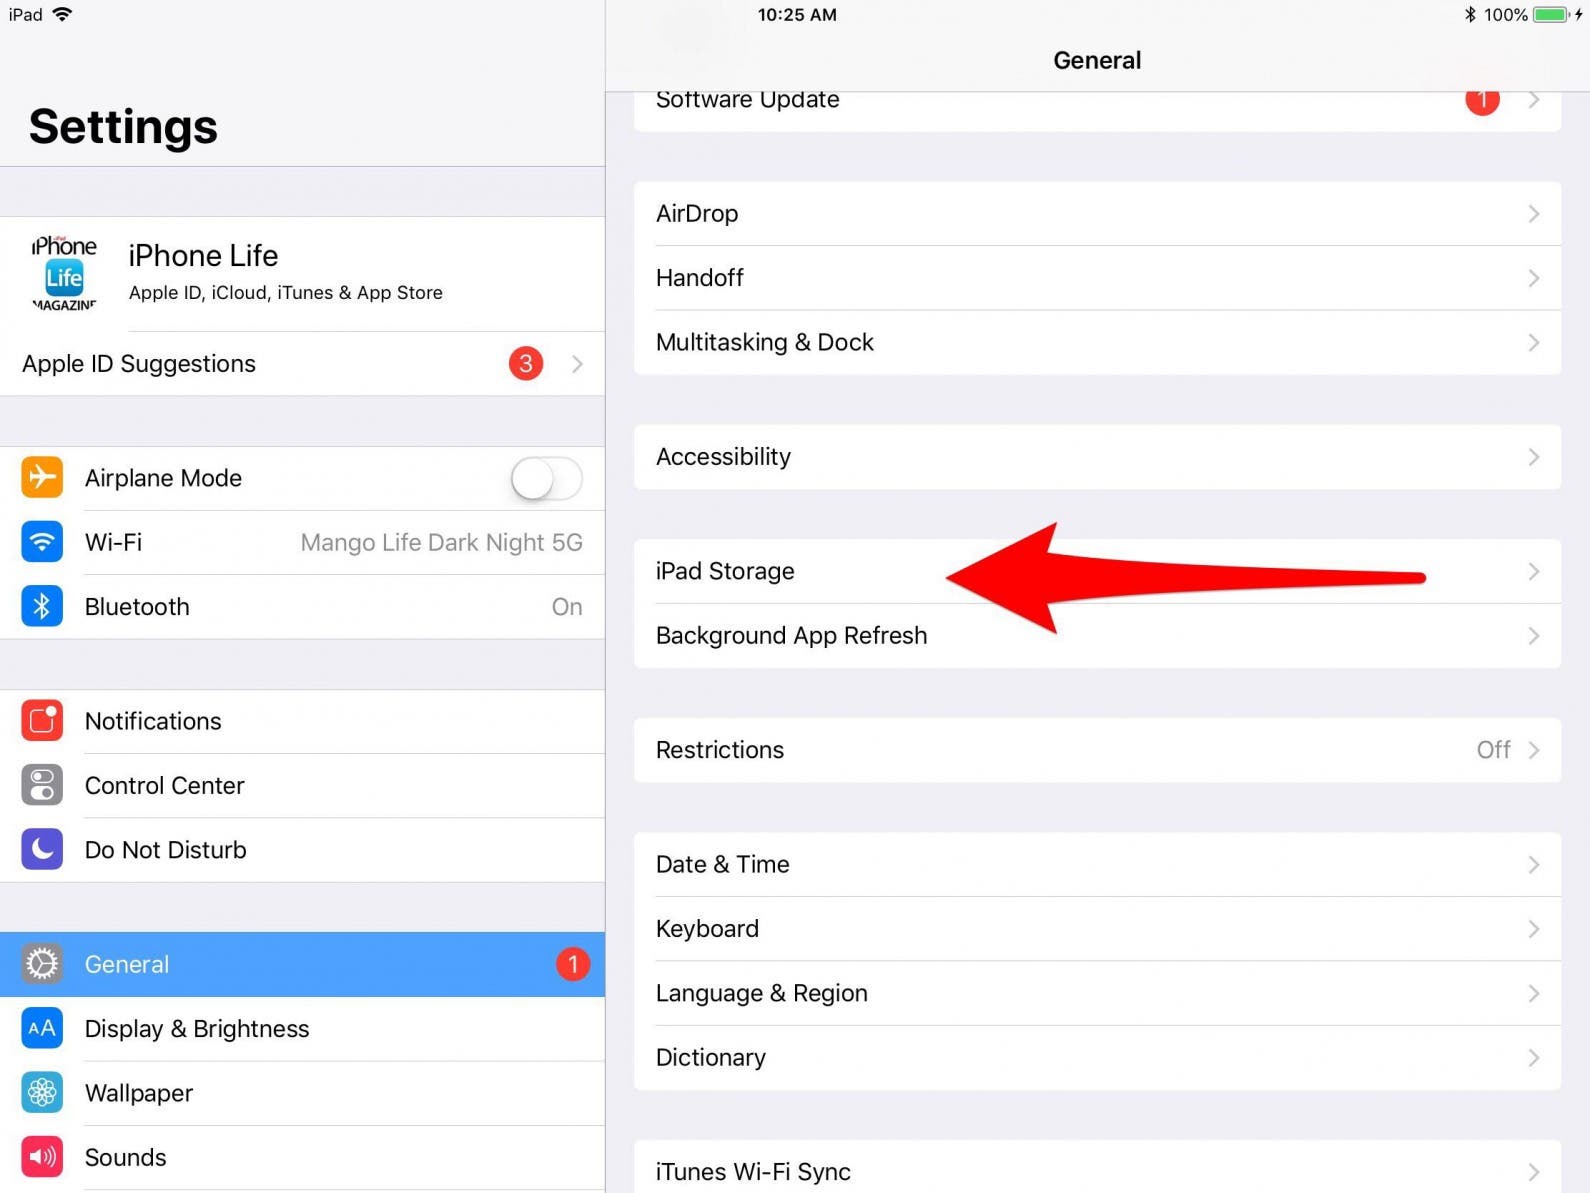 Delete, Remove &  Uninstall: How to Get Rid of Apps on the iPad